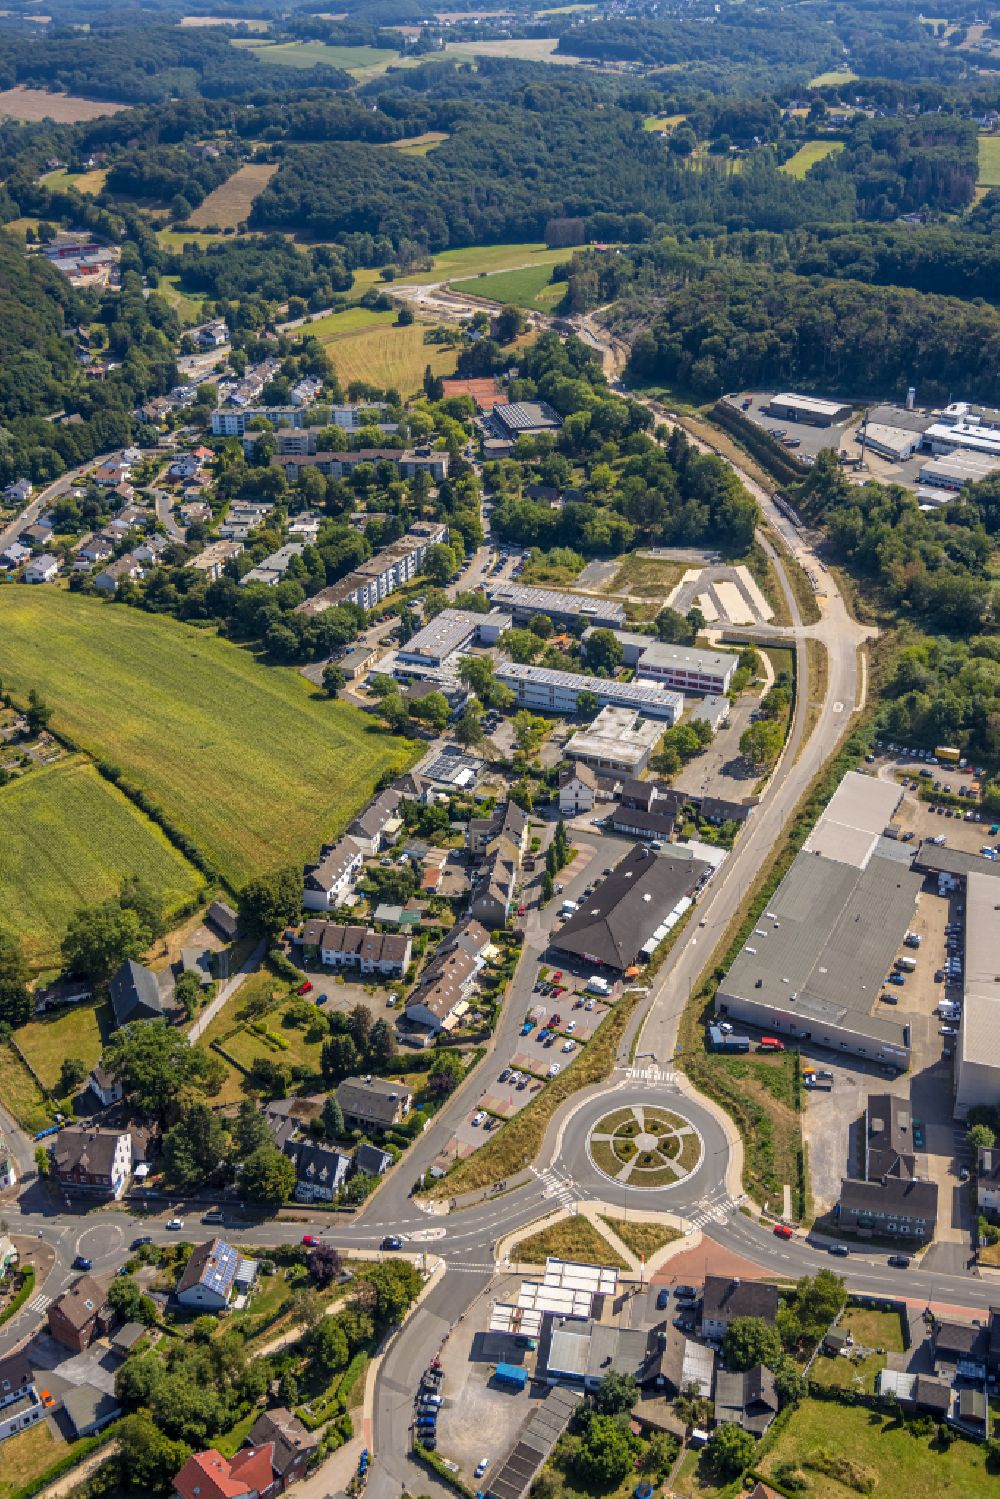 Sprockhövel from the bird's eye view: Traffic management of the roundabout road Hauptstrasse - Wuppertaler Strasse - Beisenbruchstrasse in Sprockhoevel in the state North Rhine-Westphalia, Germany